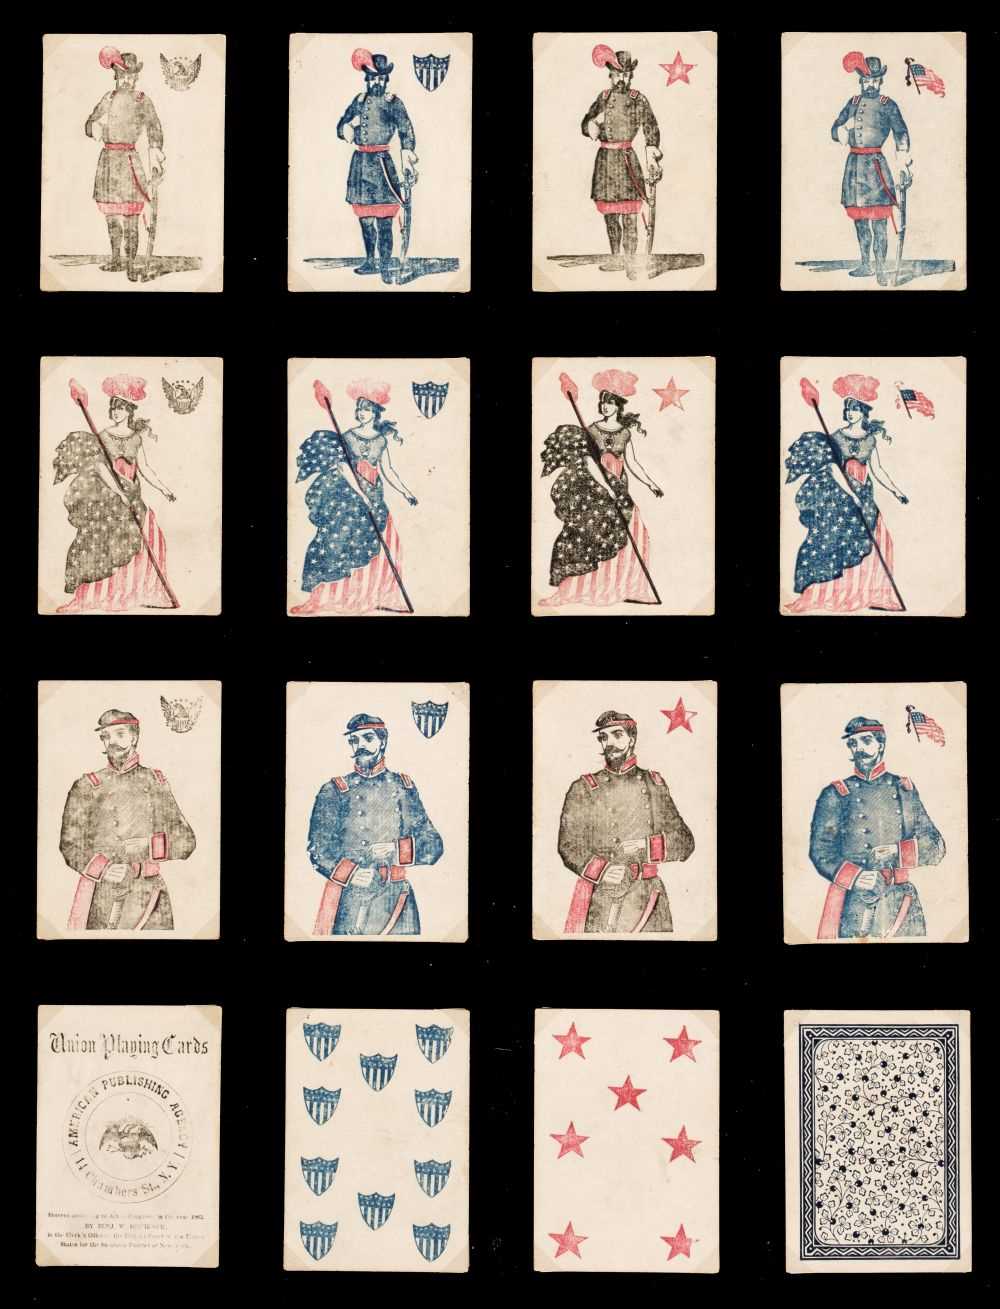 Lot 504 - American Civil War playing cards. Union Cards, second edition, New York: American Card Co., 1863